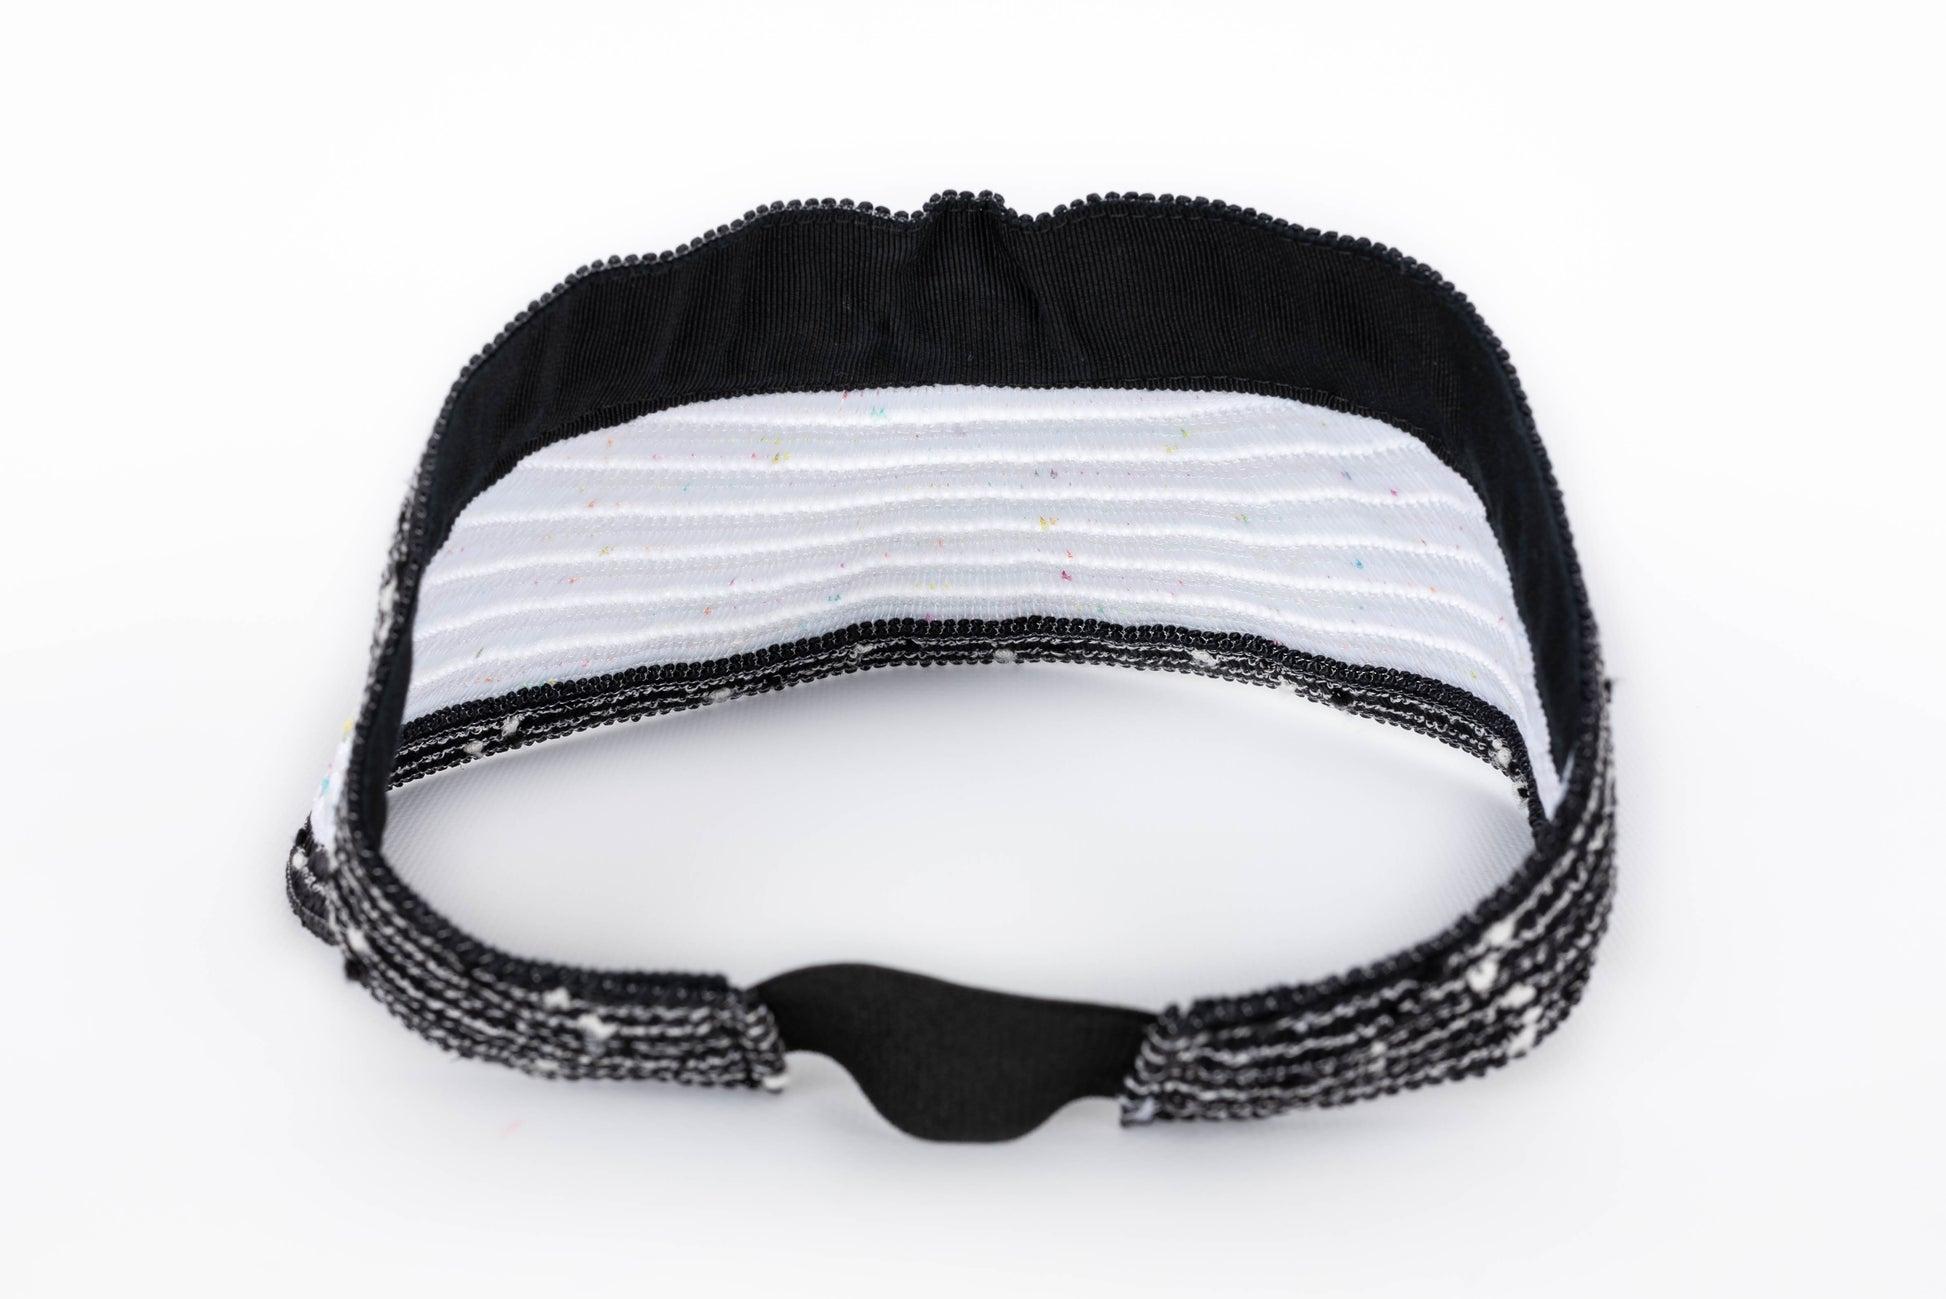 Maison Michel Eyeshade in Black and White Raffia Hat For Sale 2